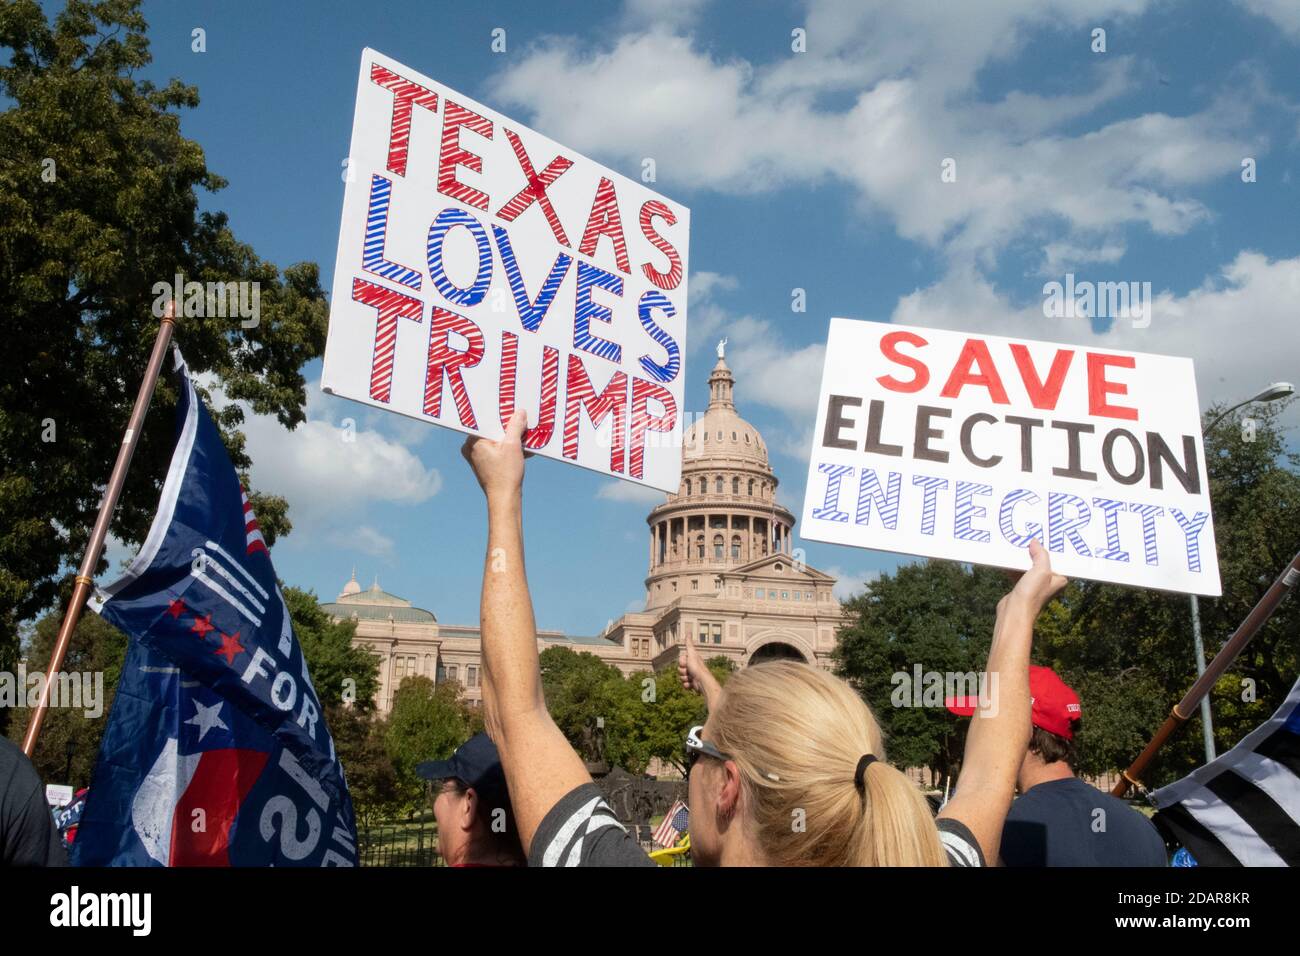 Austin, TX USA November 14, 2020: Several hundred supporters of President Donald Trump rally in front of the Texas Capitol in downtown Austin, adamant that the president should not concede the November 3 election to Joe Biden until cases of election fraud are investigated and all votes counted. So far no widespread cases of illegal voting have arisen almost two weeks after the election. Credit: Bob Daemmrich/Alamy Live News Stock Photo